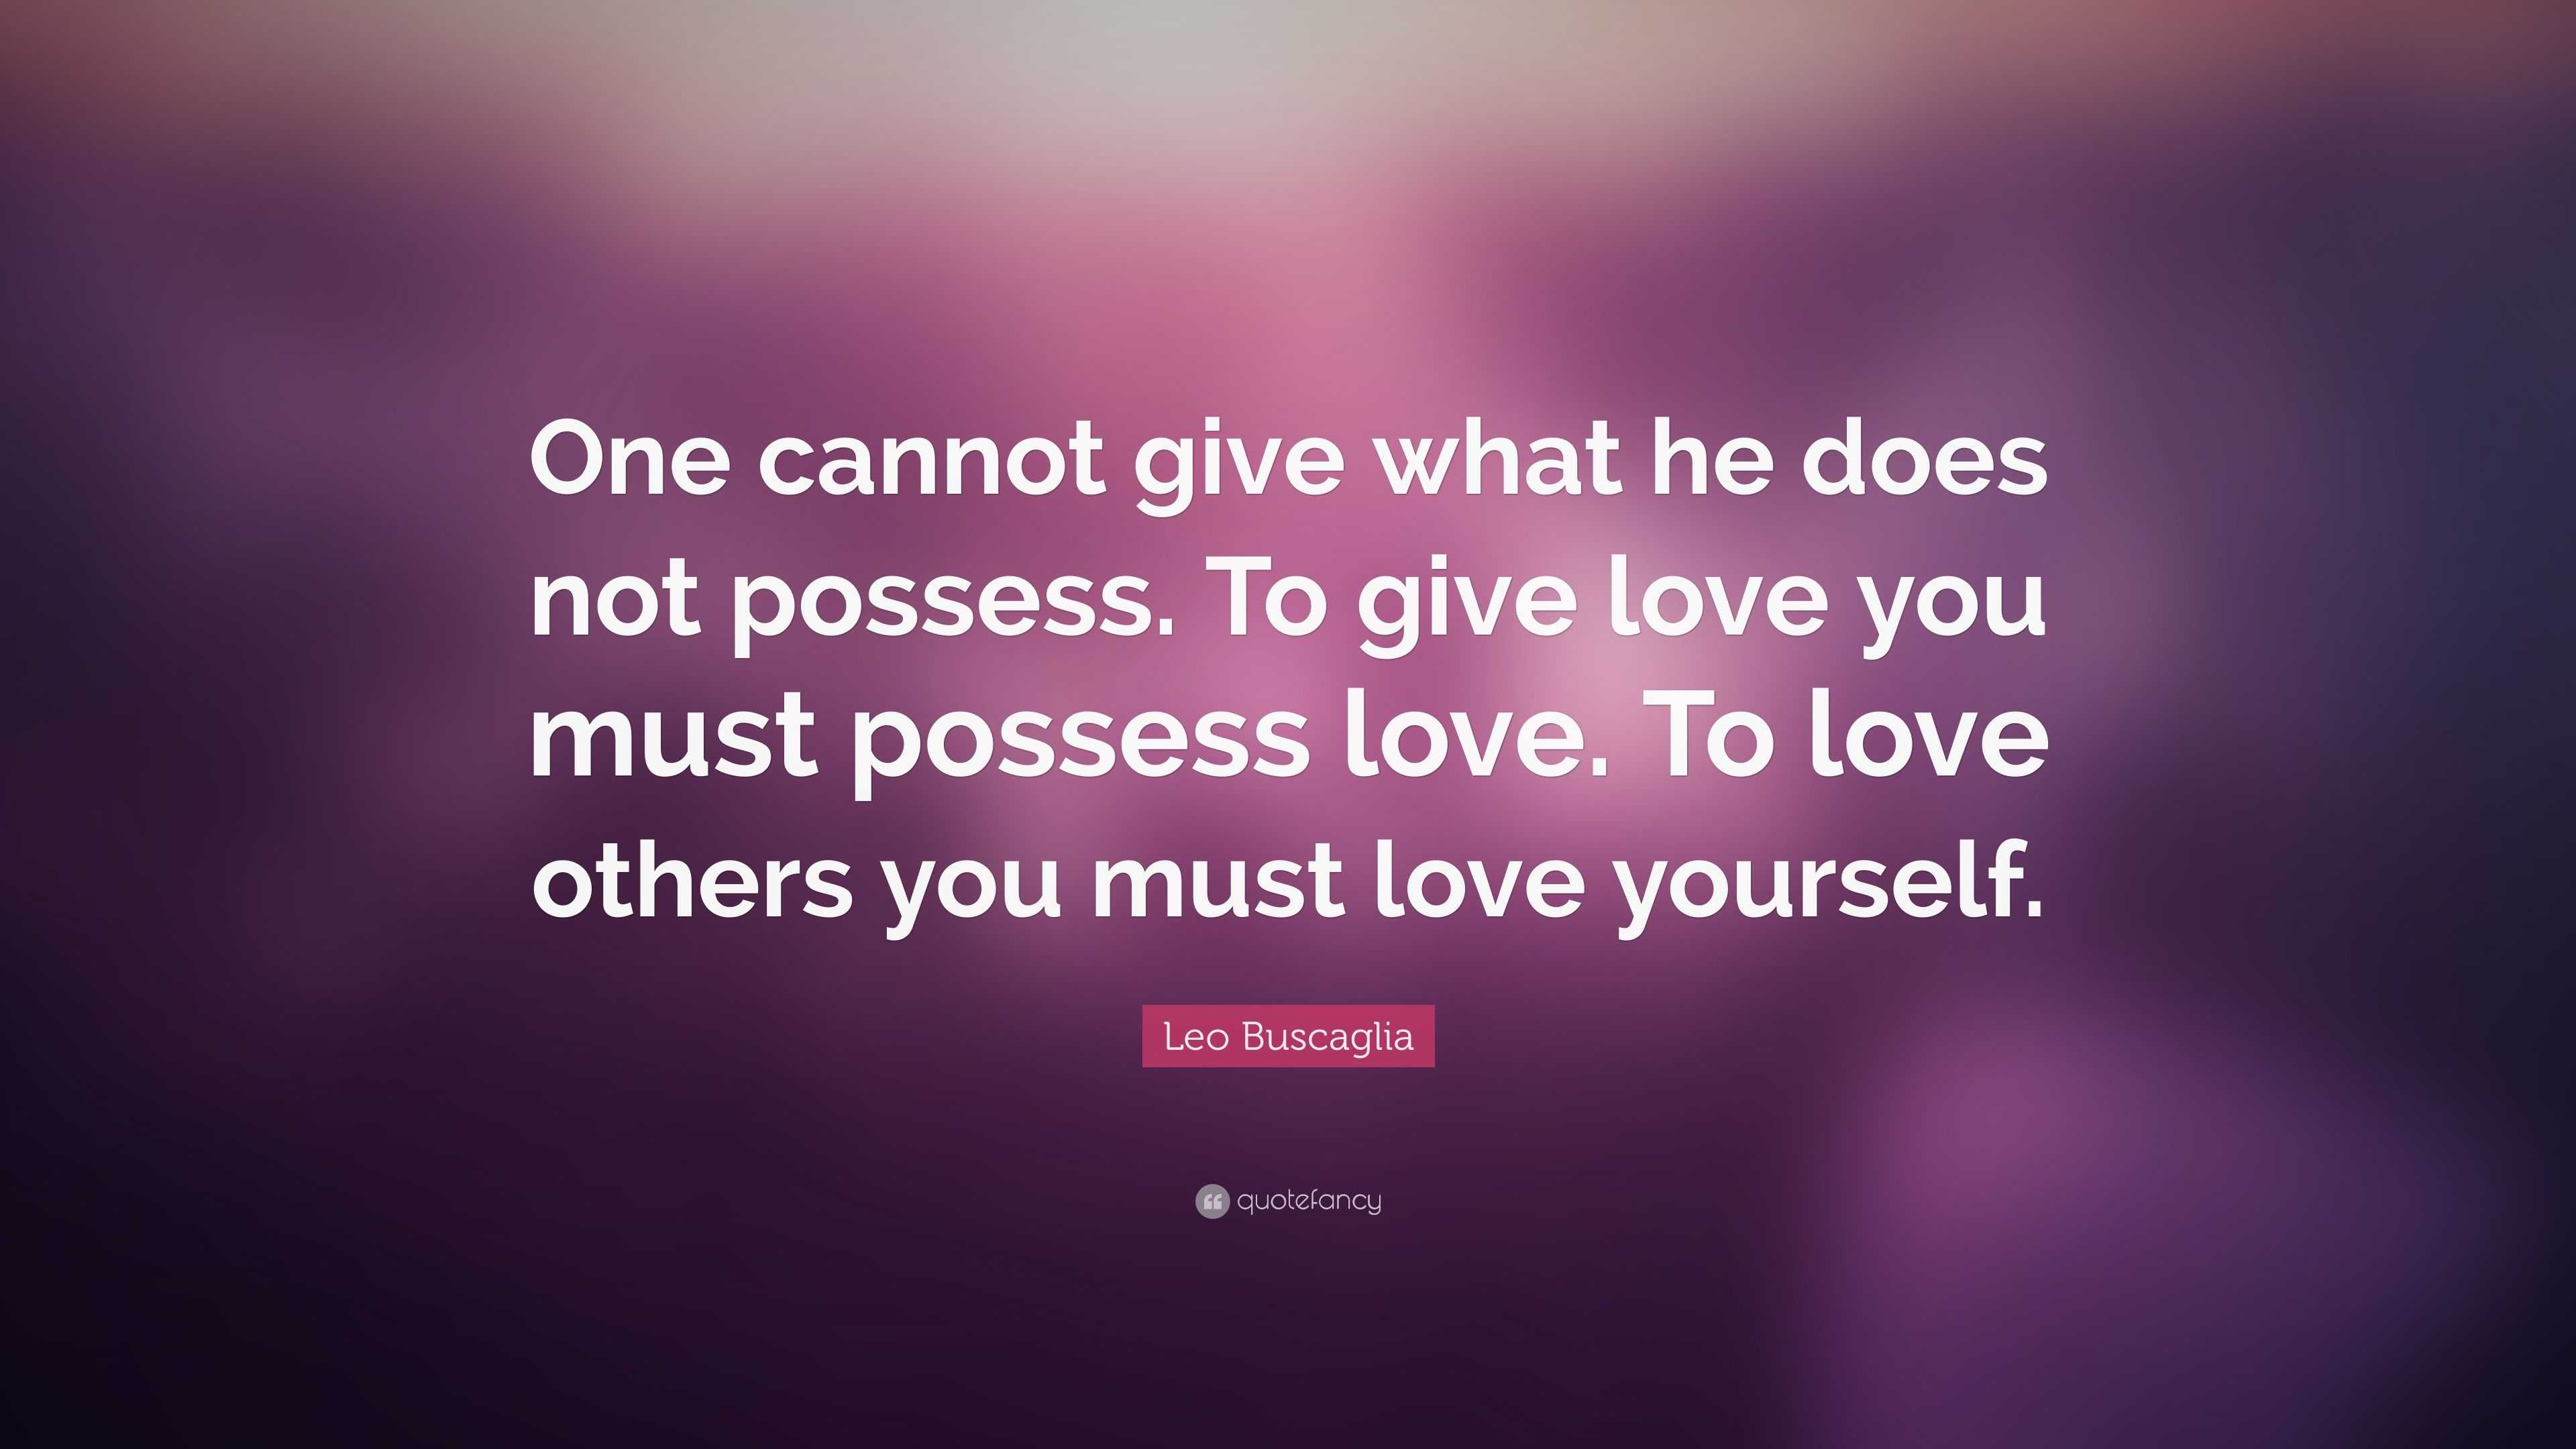 Leo Buscaglia Quote: “One cannot give what he does not possess. To give ...